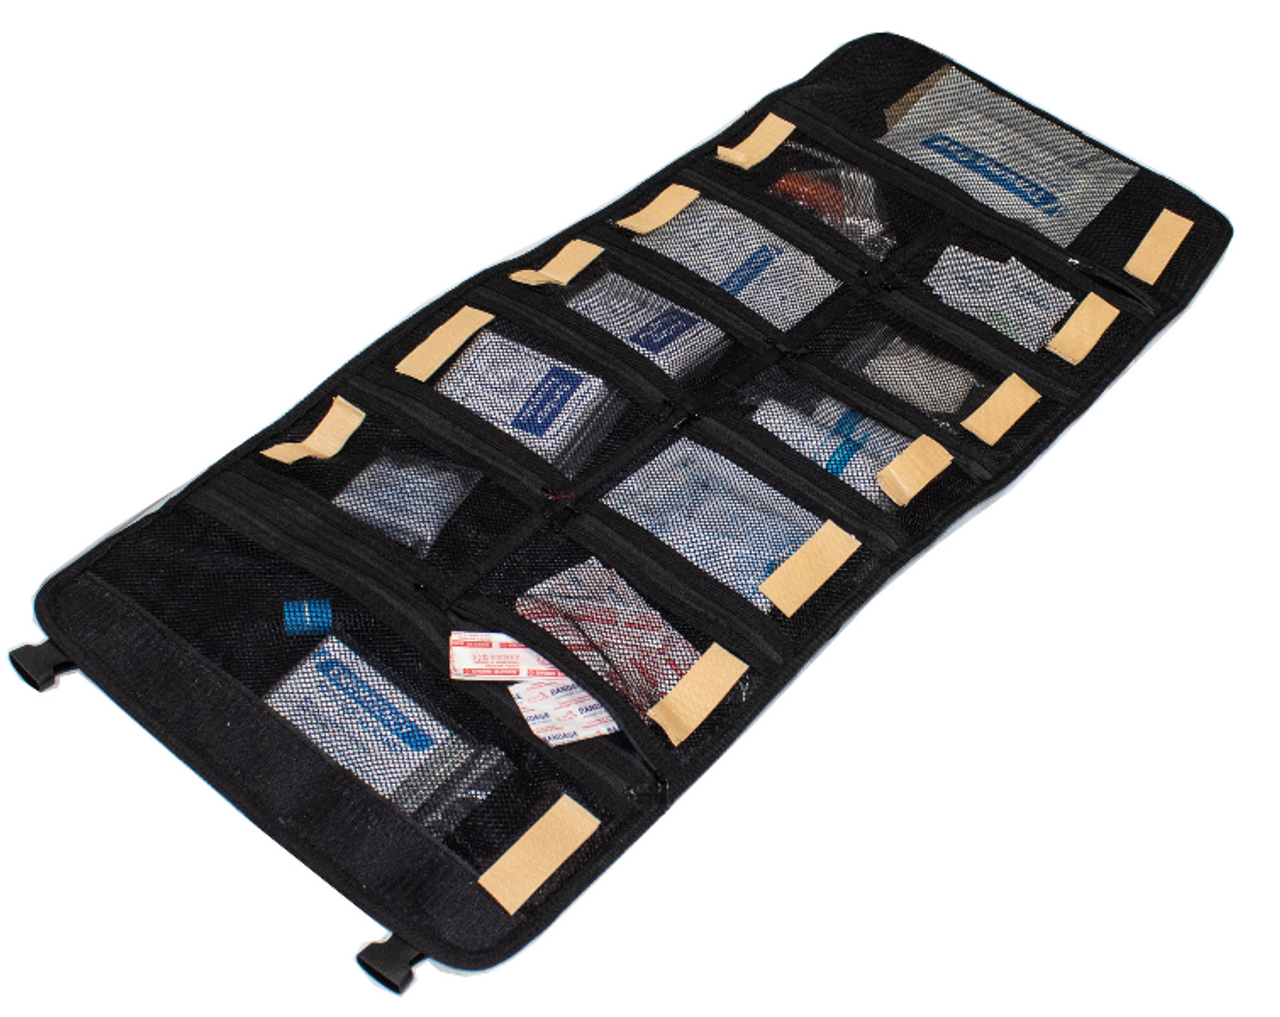 Overland Vehicle Systems 21109941 Canyon Bag Rolled First Aid Storage Tote